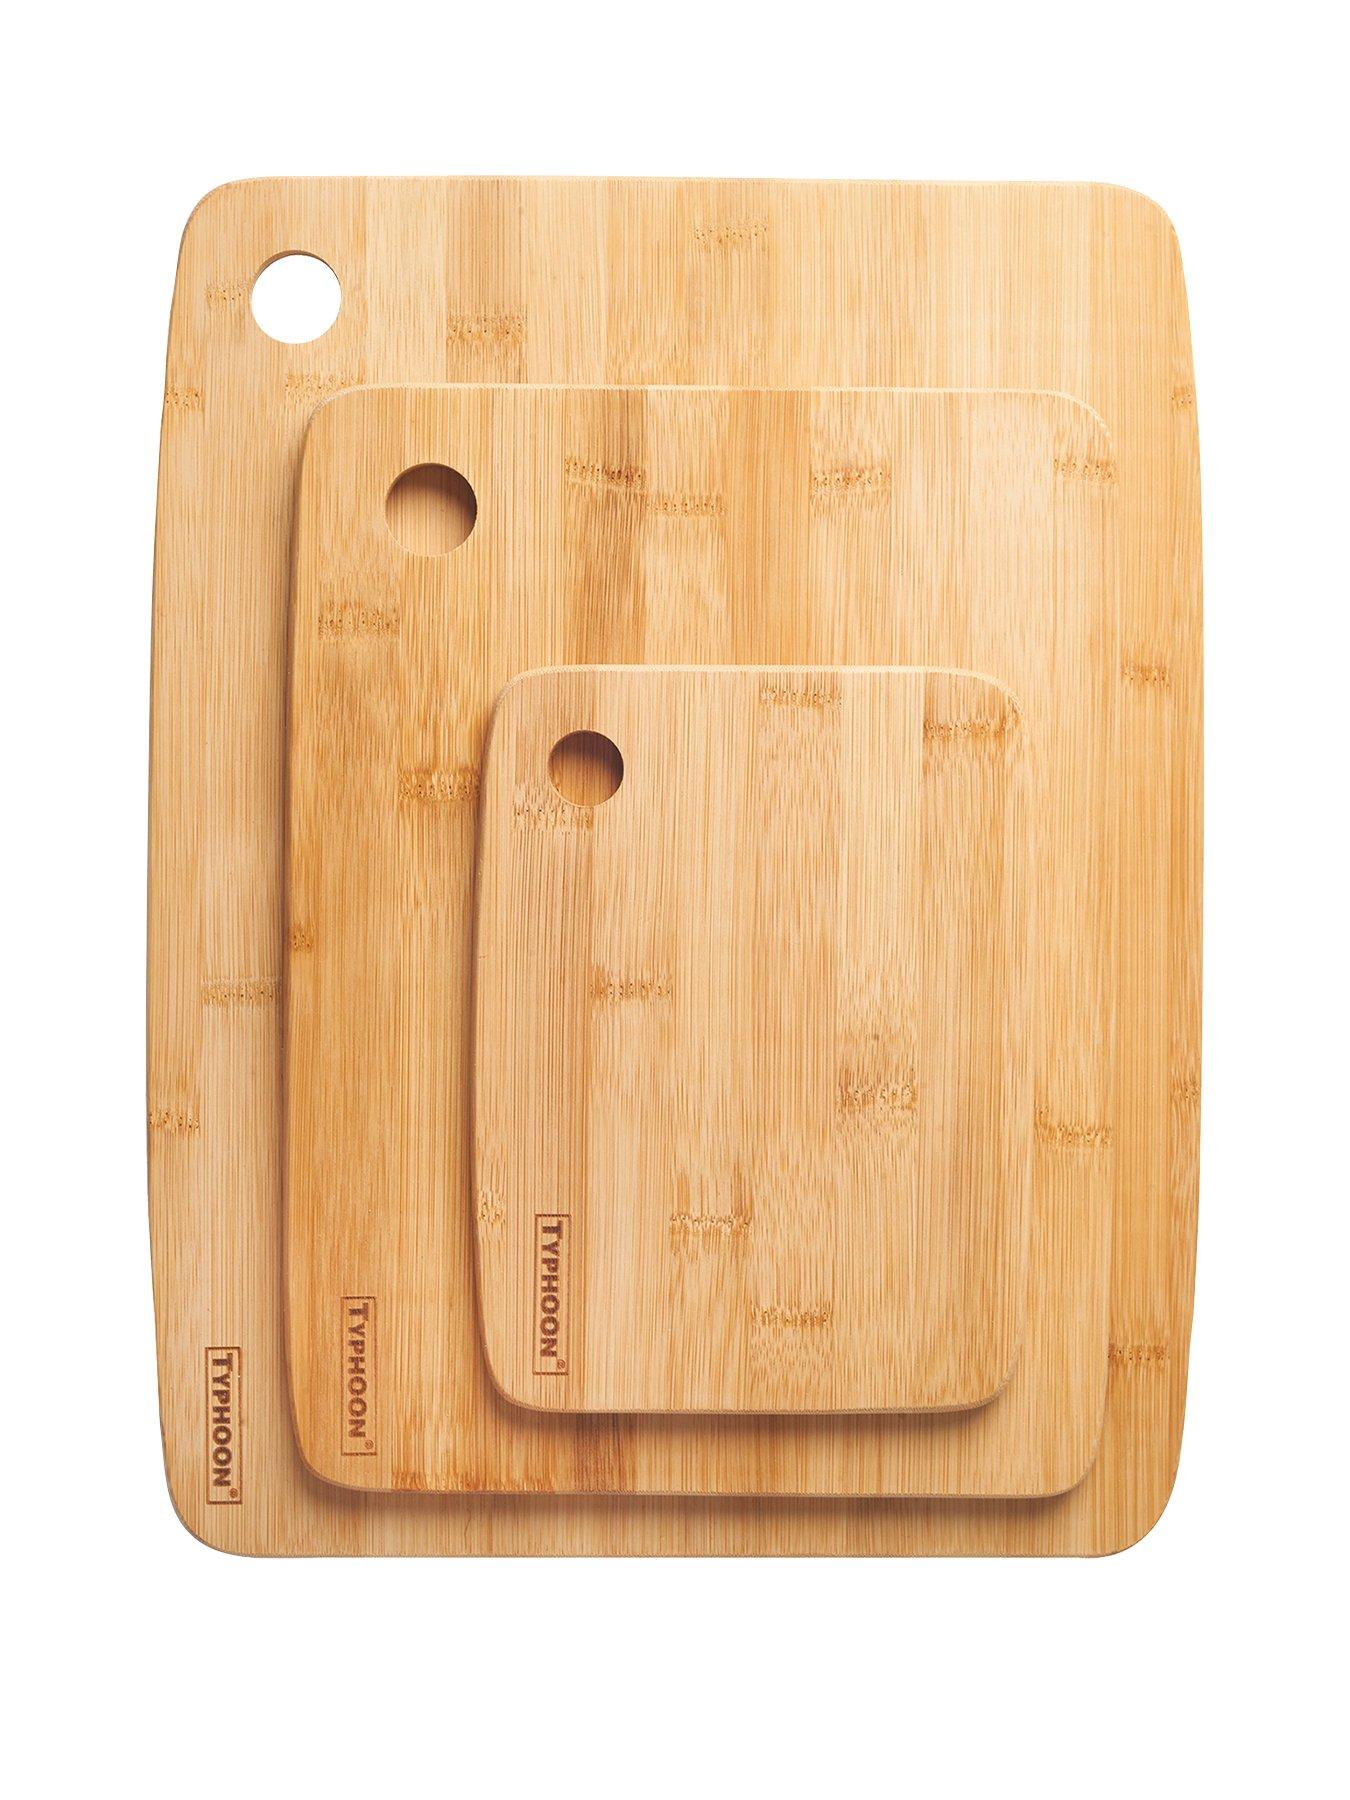 Brite Concepts Mini Bamboo Cutting Board, 6 by 9 Inches (Pack of 1): Home &  Kitchen 